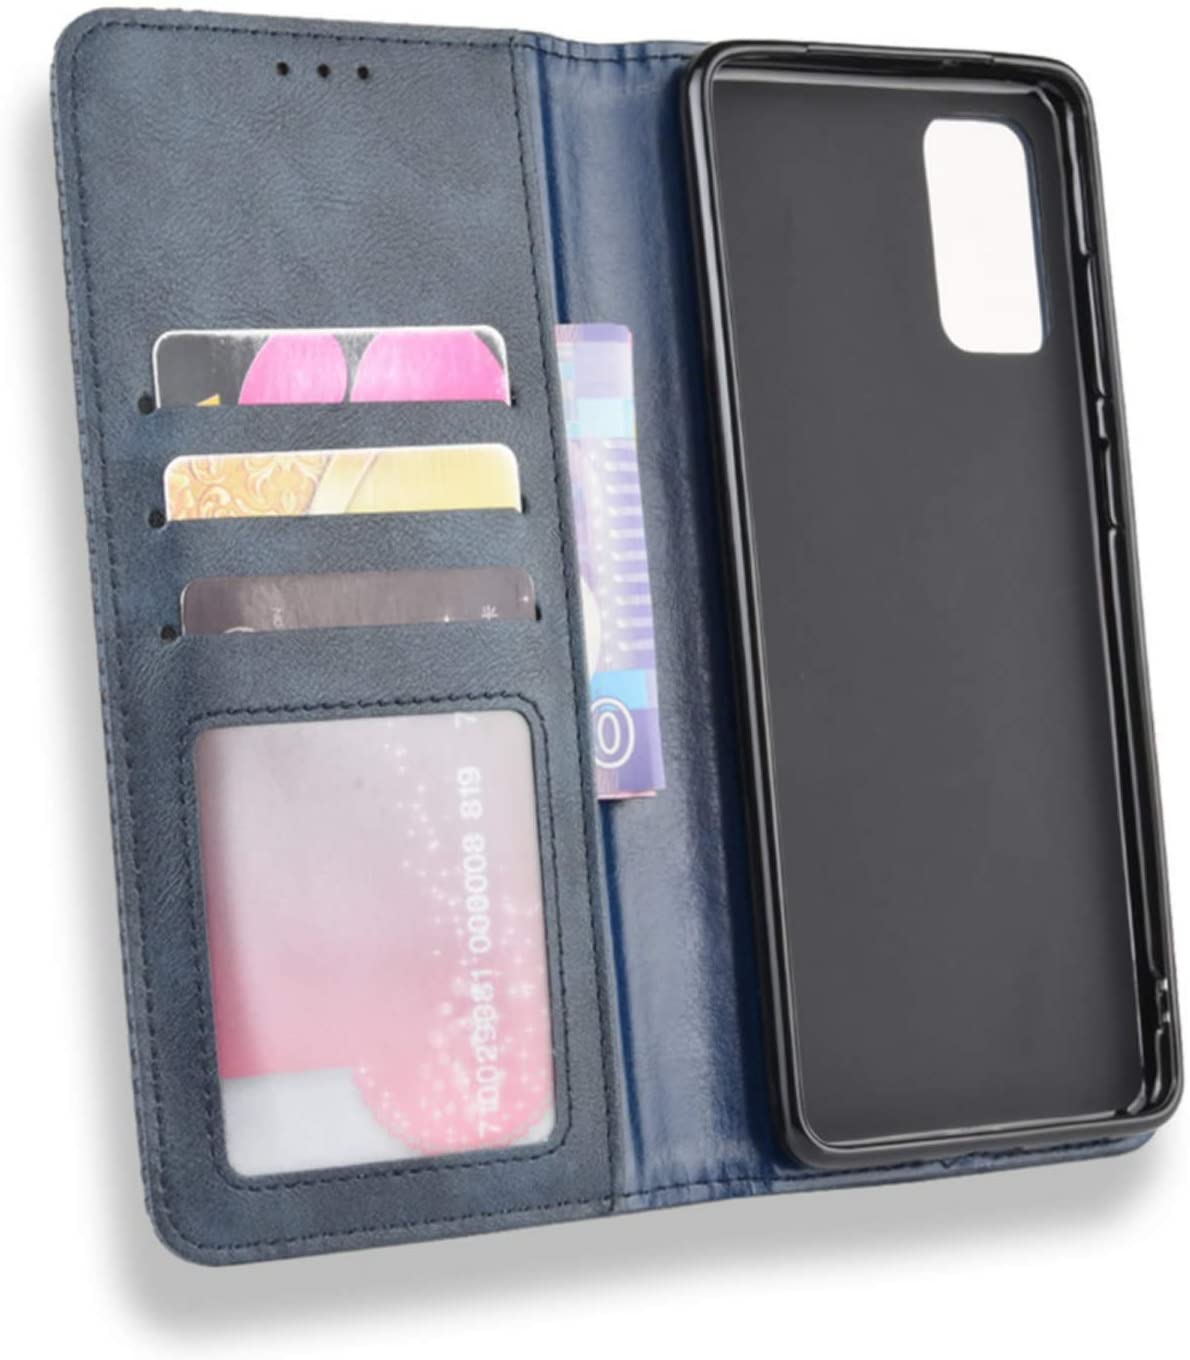 Samsung Galaxy S20 FE 360 degree protection leather wallet flip cover by excelsior